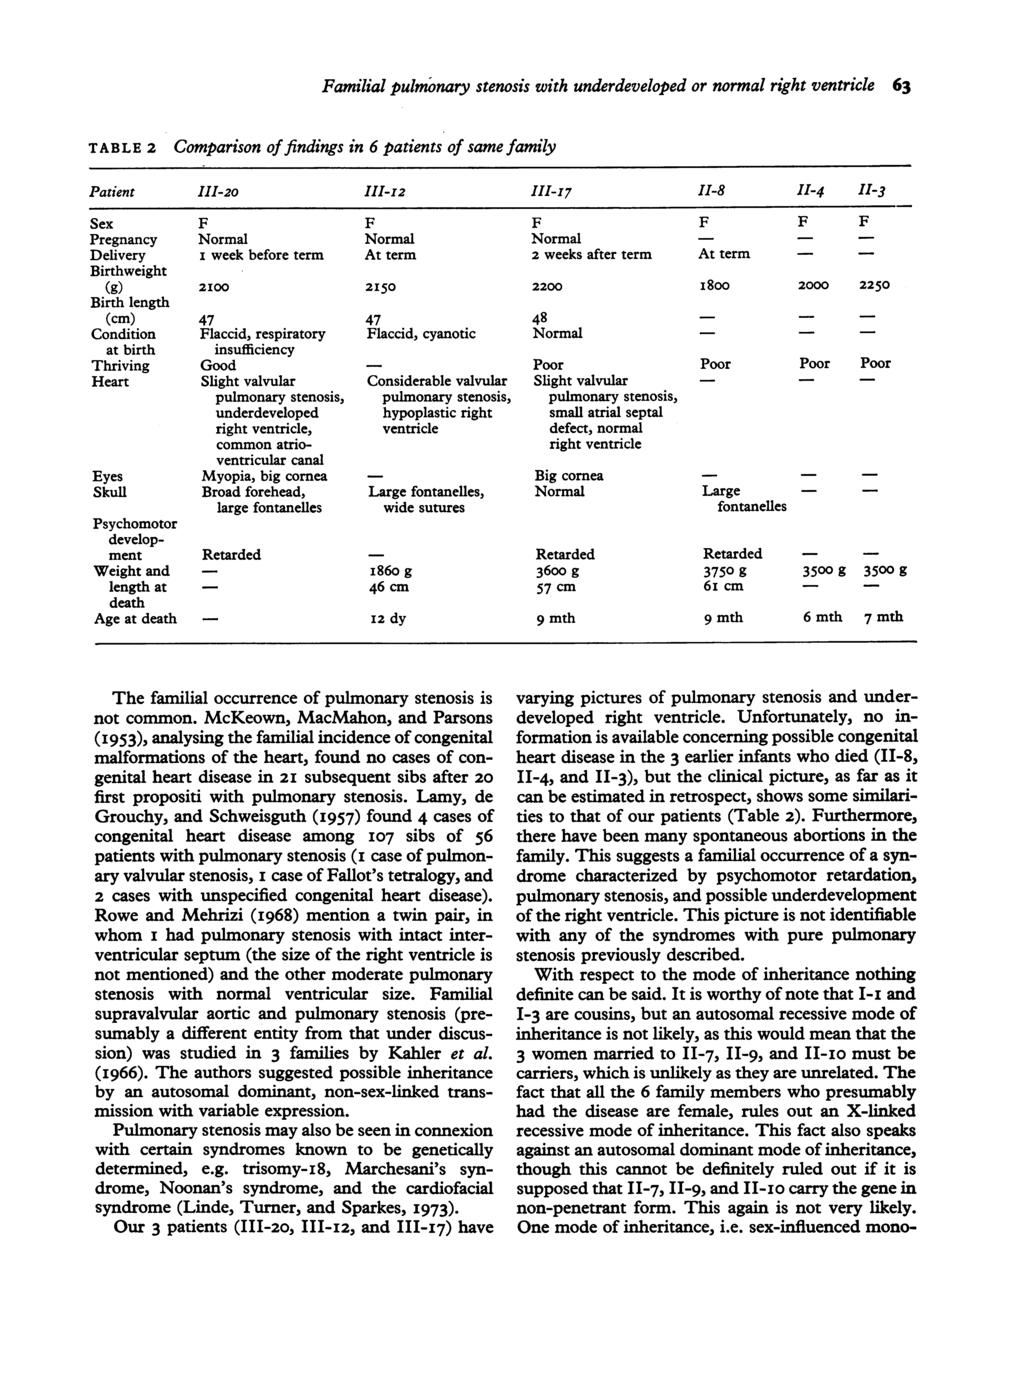 TABLE 2 Familial pulmonary stenosis with underdeveloped or normal right ventricle 63 Comparison offindings in 6 patients of same family Patient III-20 III-I2 III-17 II-8 II-4 II-3 Sex F F F F F F